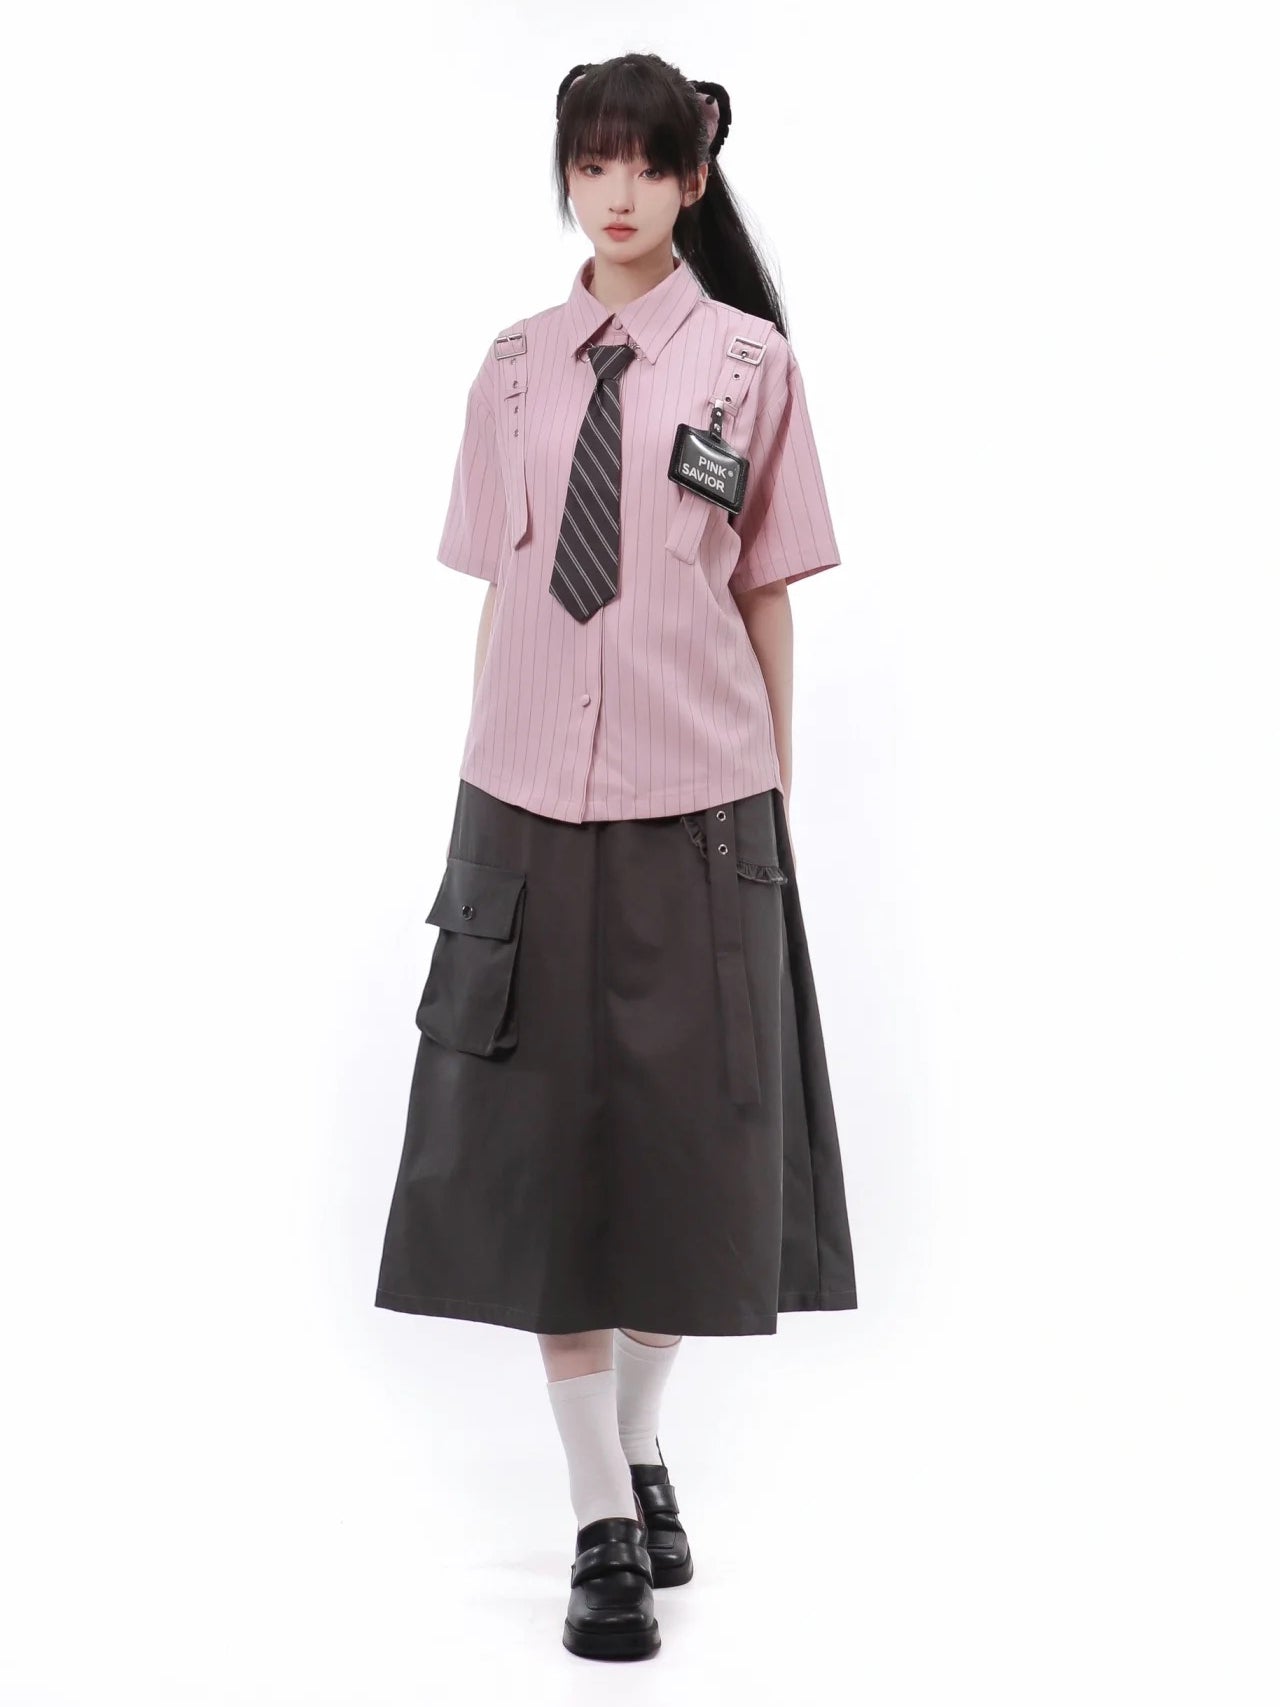 Casual Literary Girl Blouse and Skirt